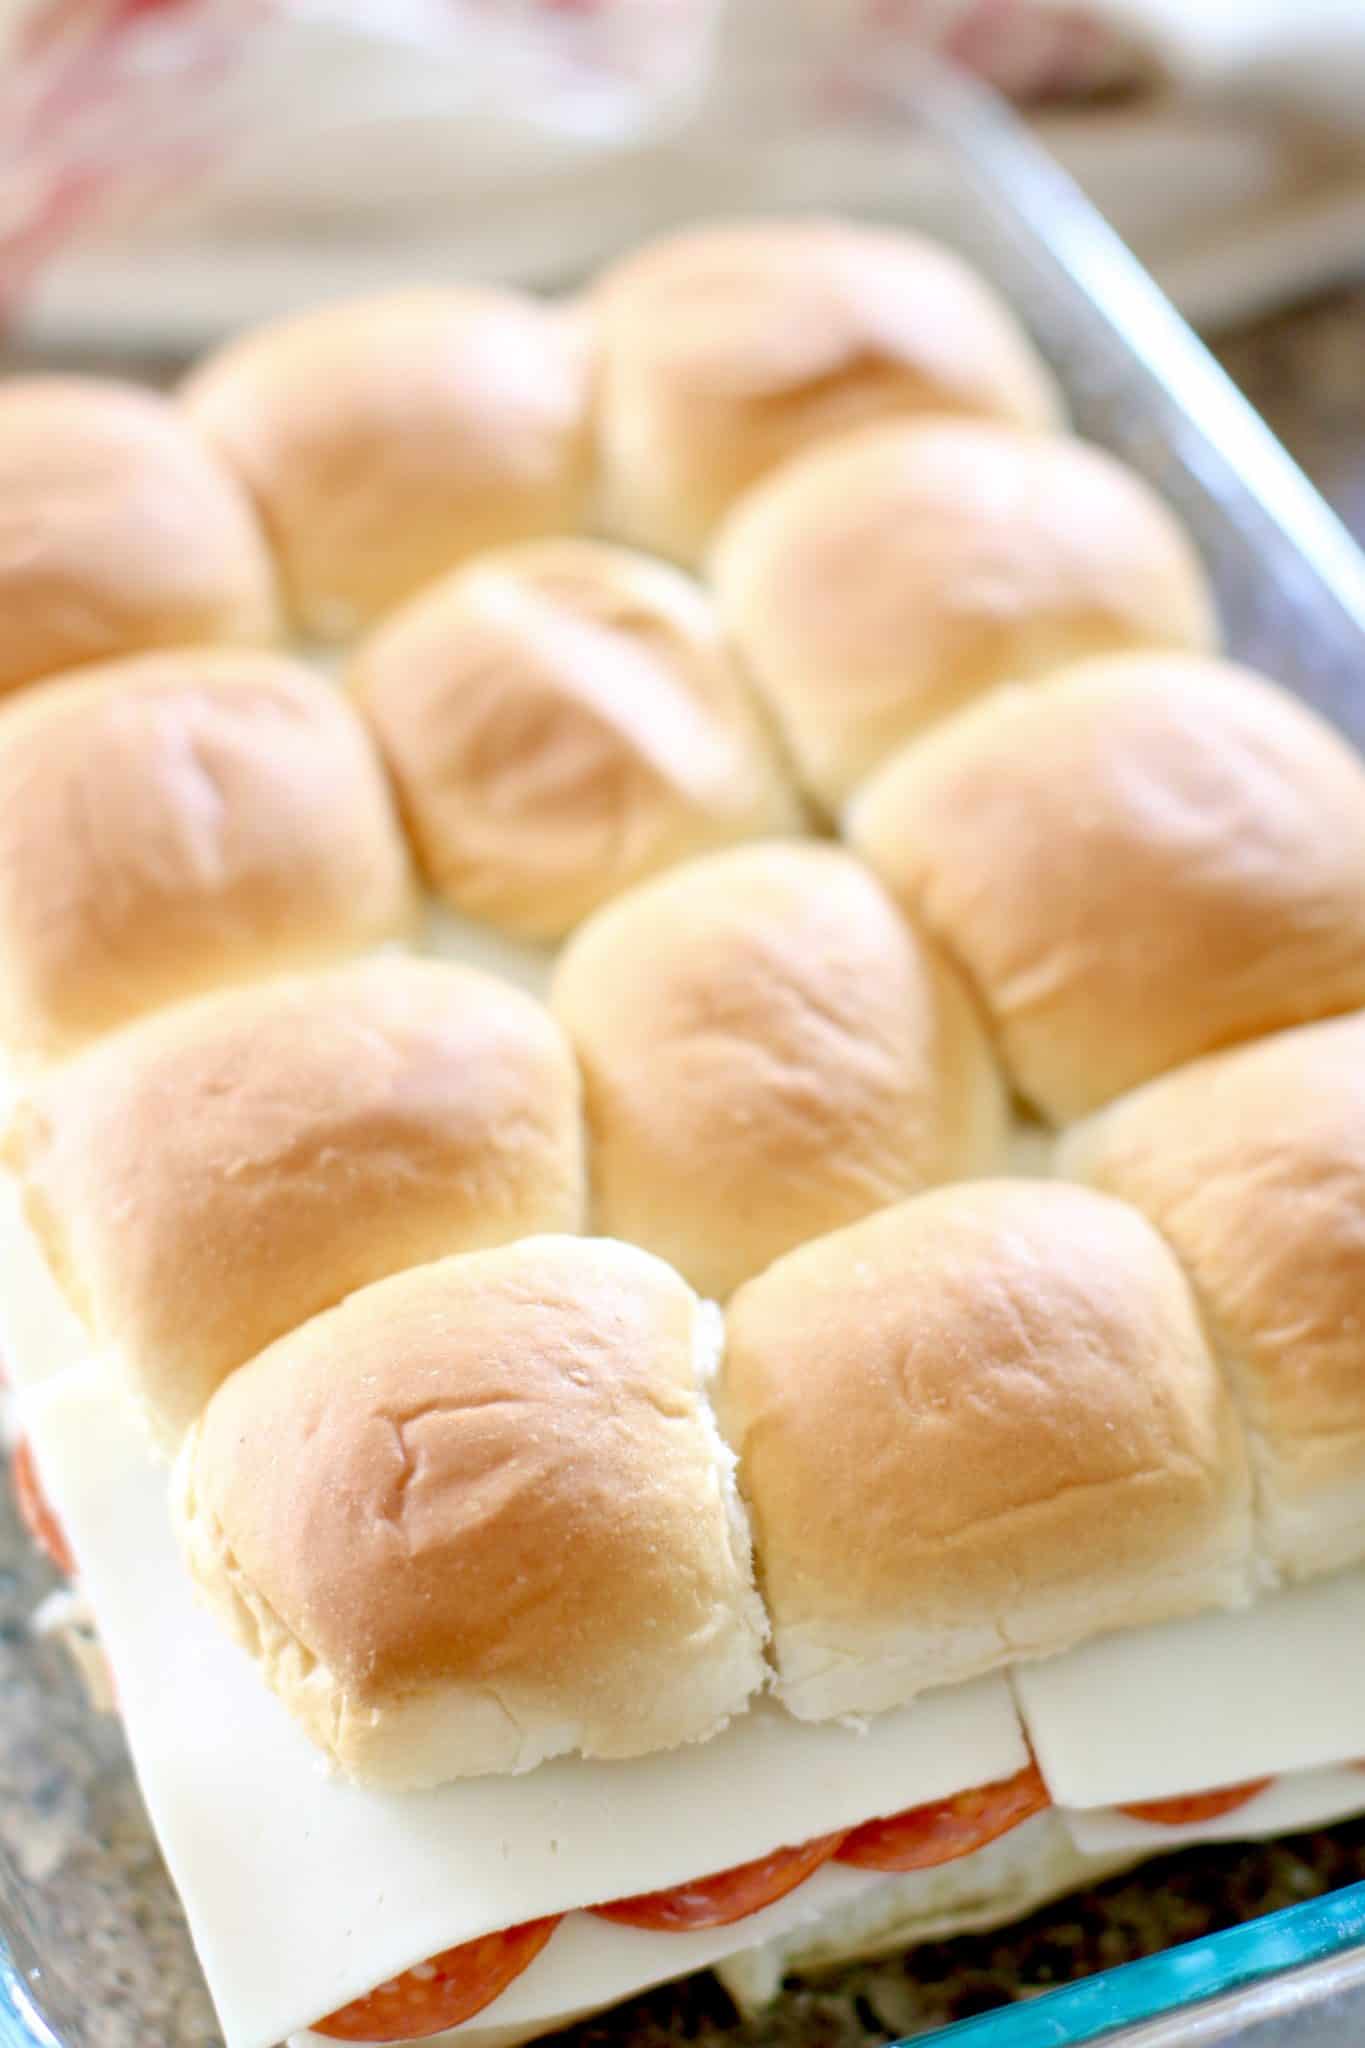 top layer of buns put back on top.